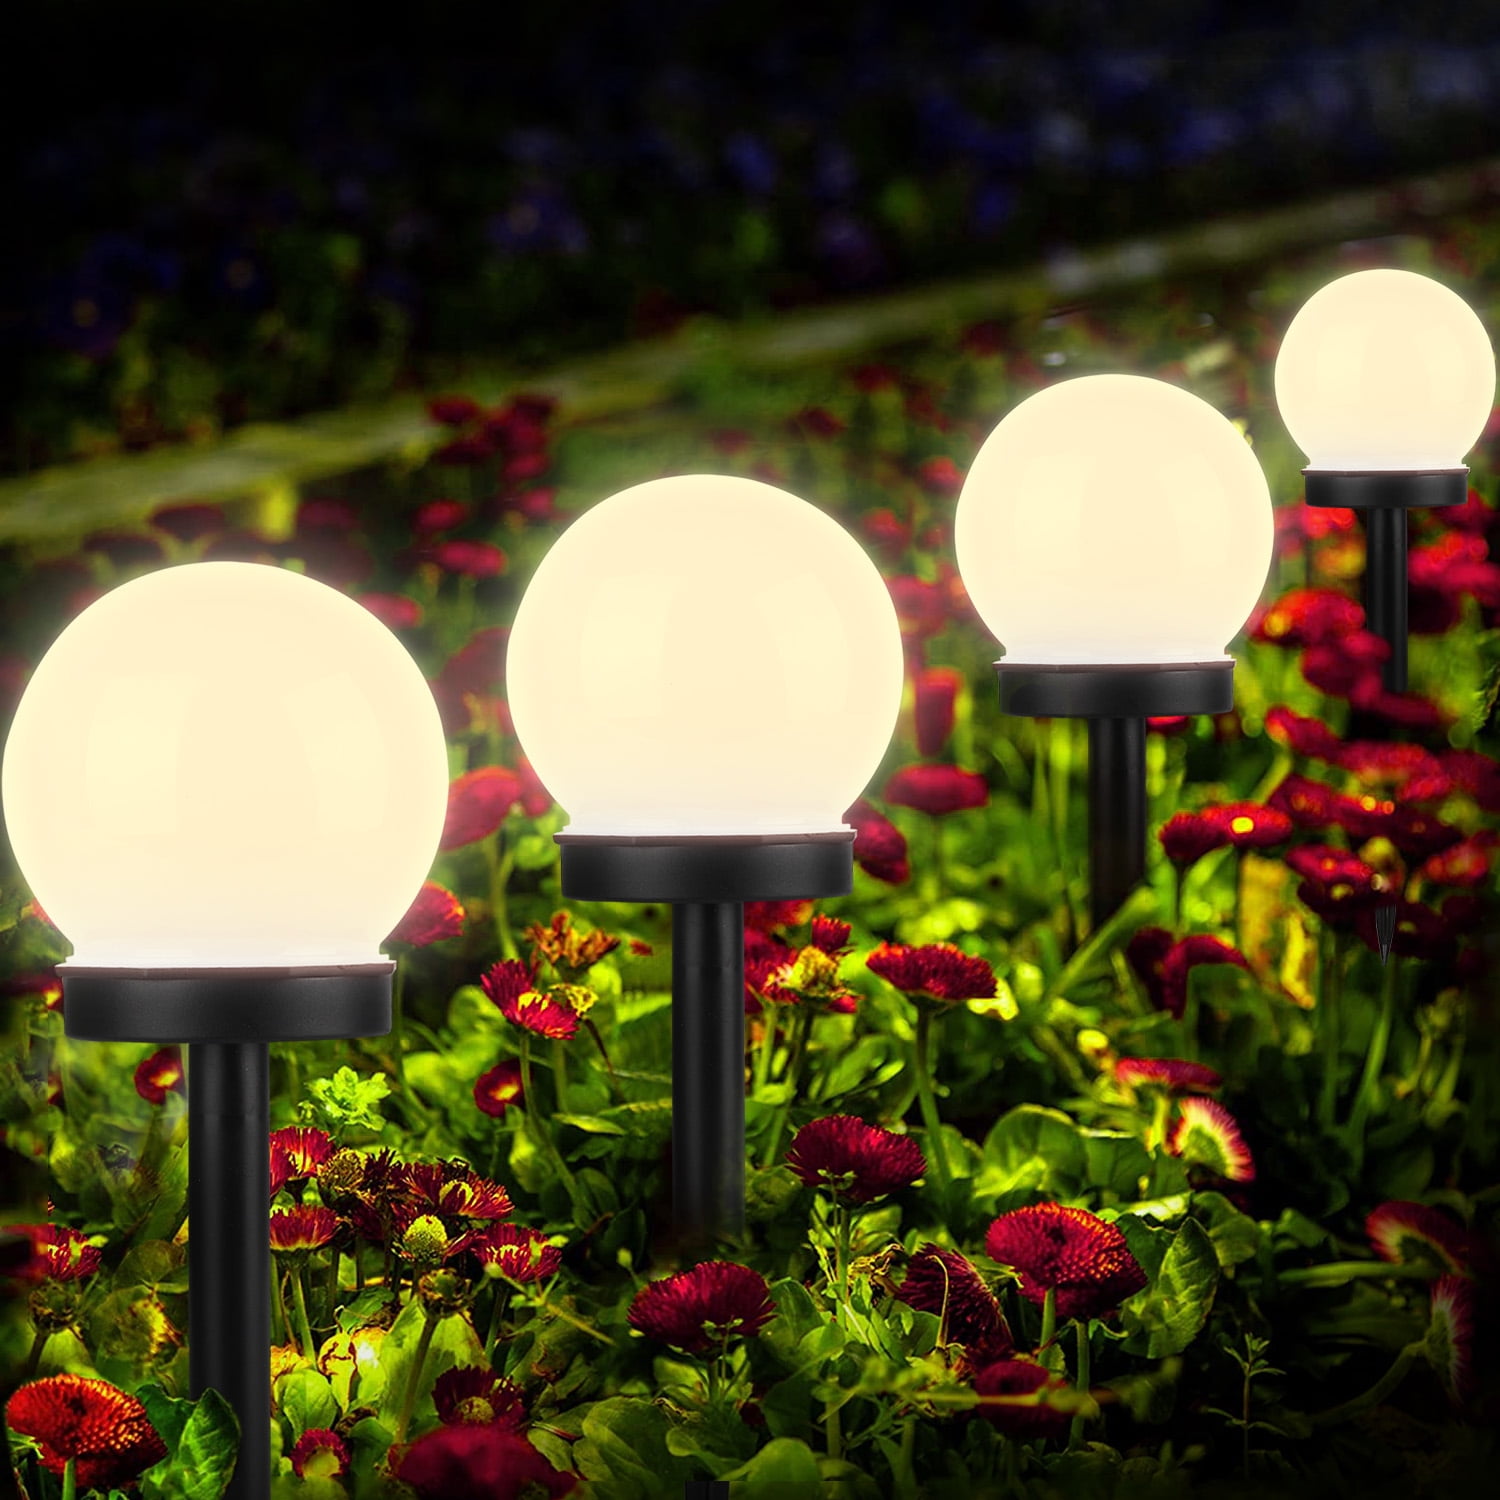 Outdoor Hanging Solar LED Lights Waterproof Bulb Garden Ball Camping Lamps 